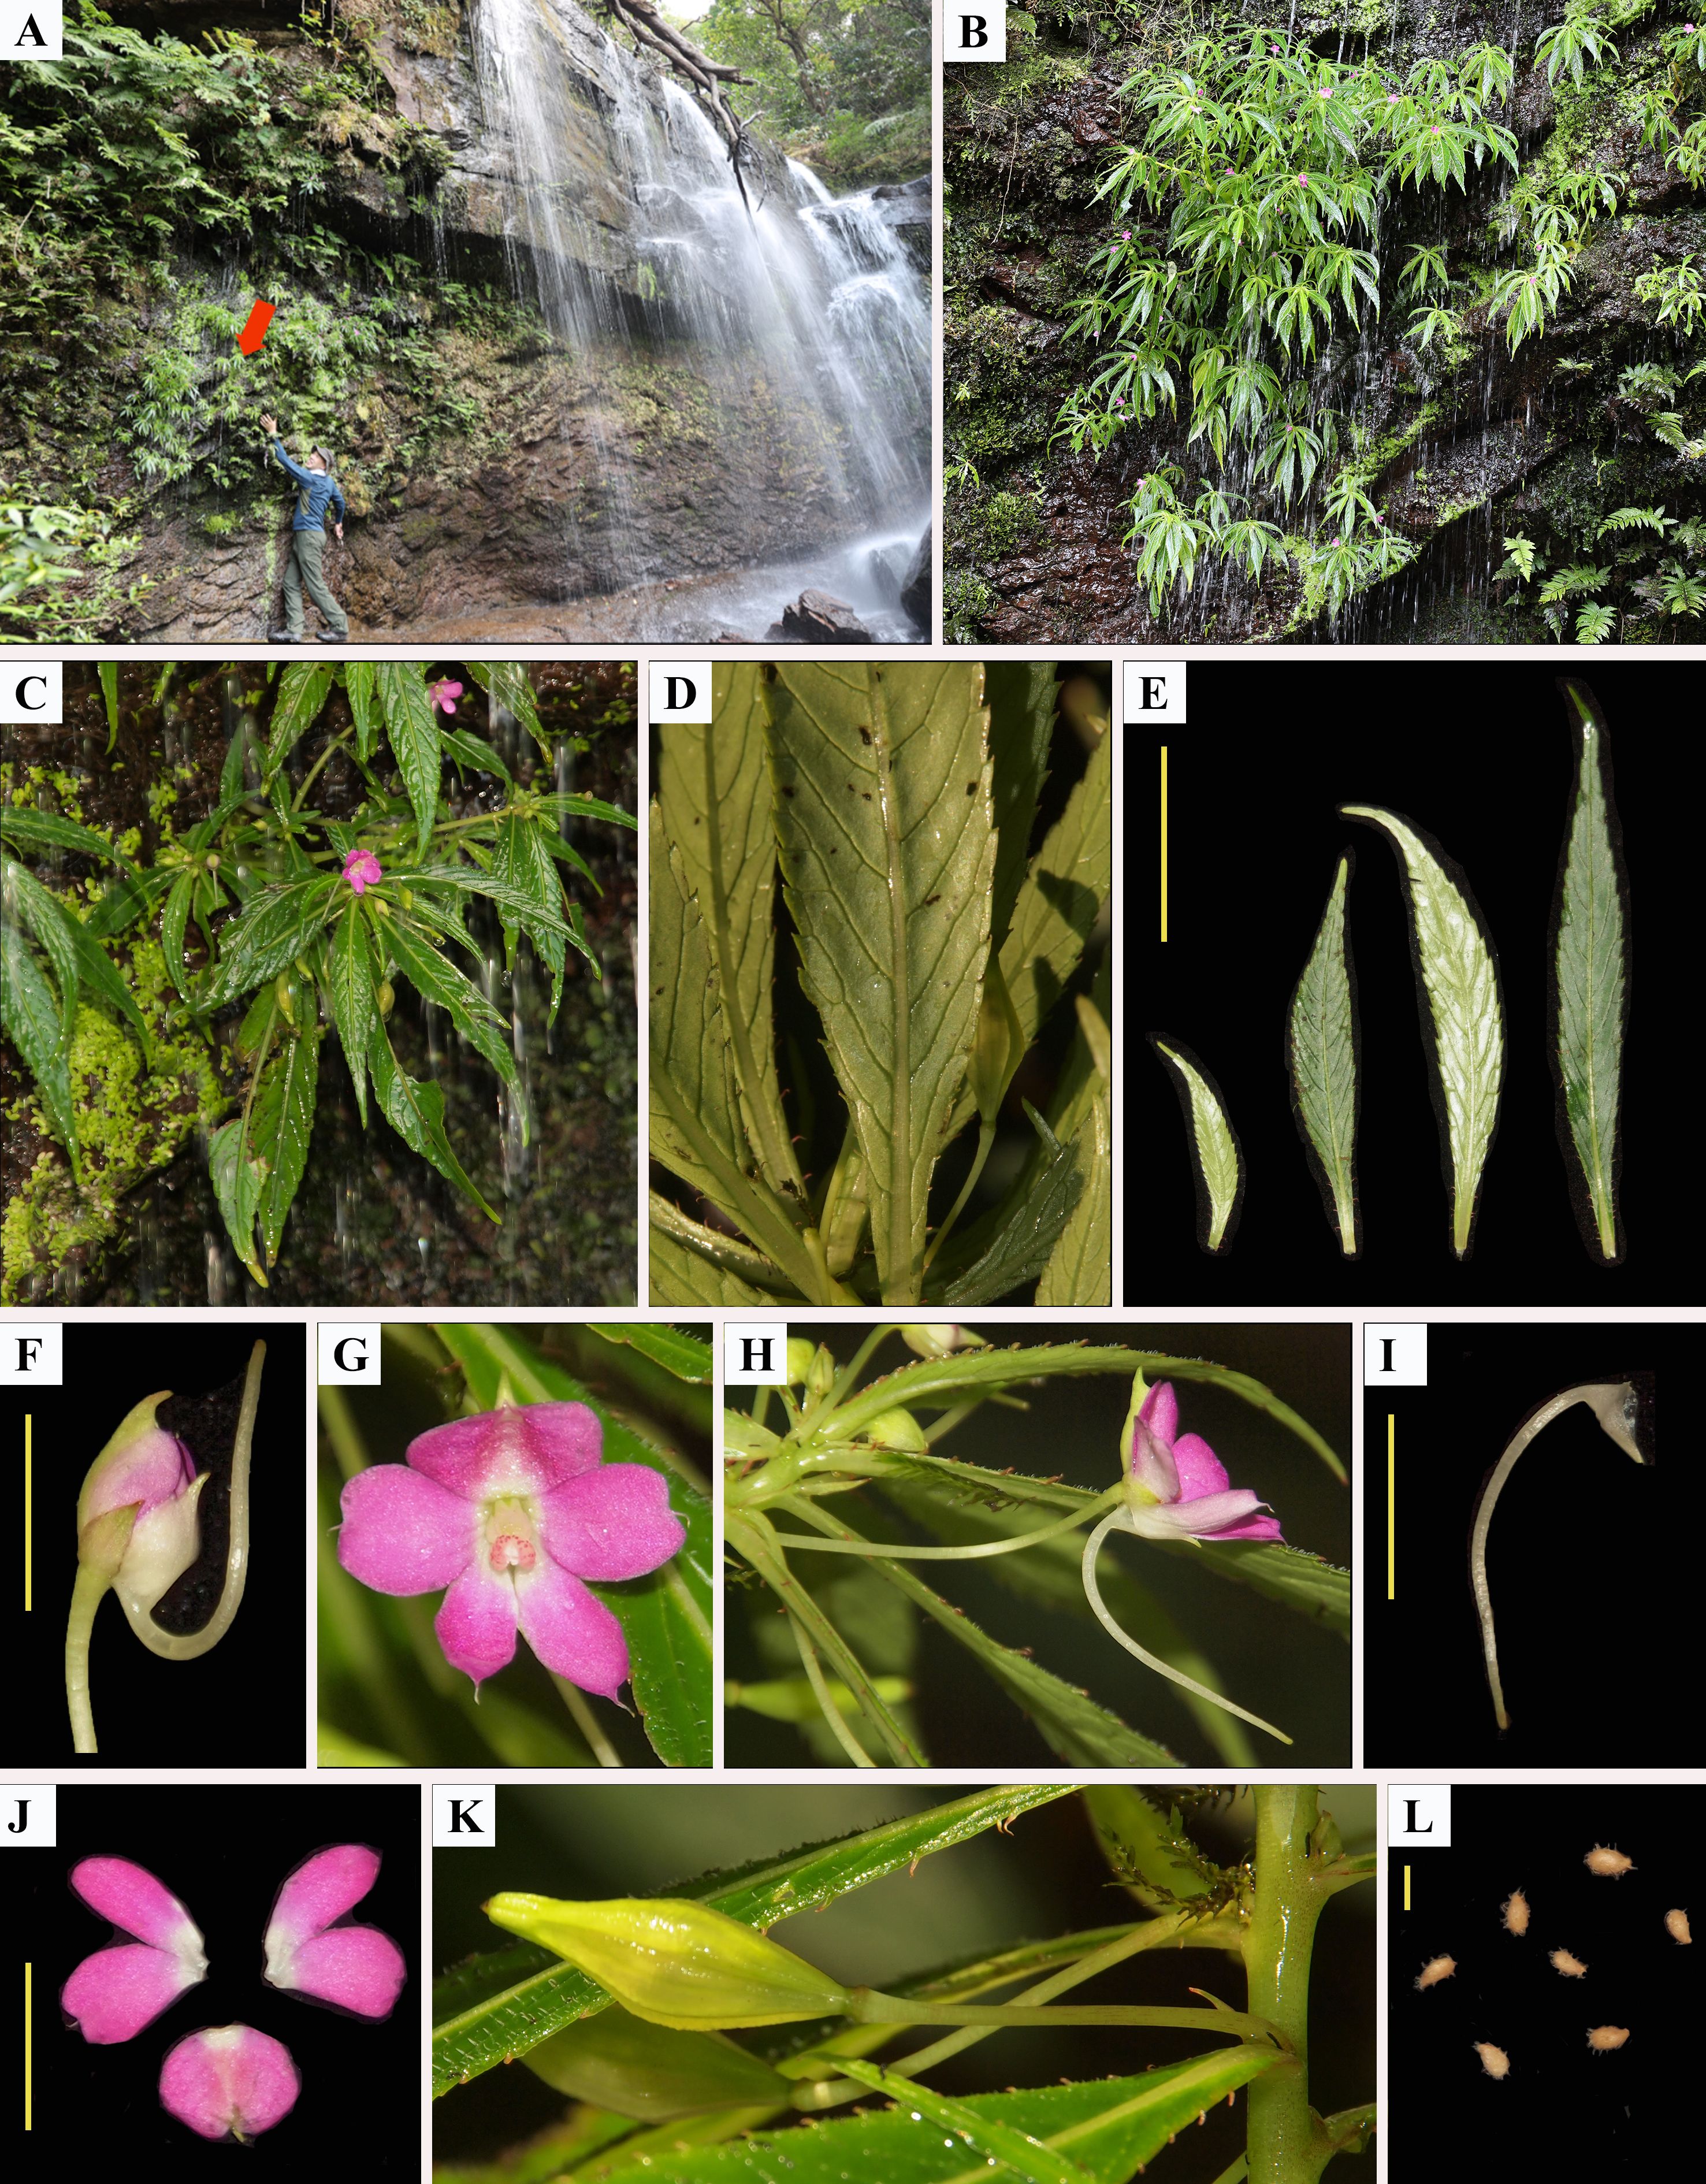 Field image of plant included in article